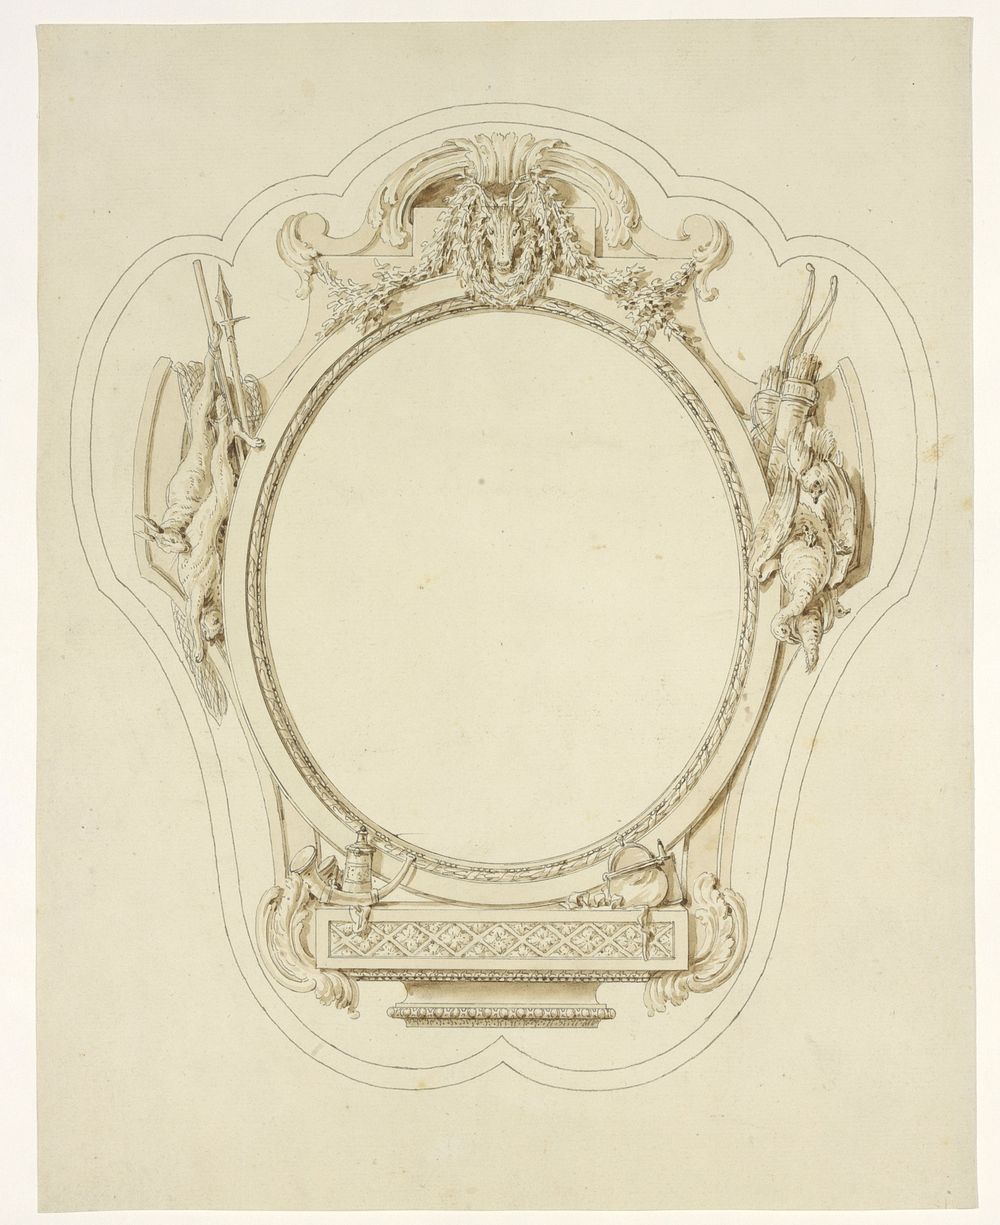 Two designs for hand-screens (c. 1770 - c. 1780) by Jean Michel Moreau